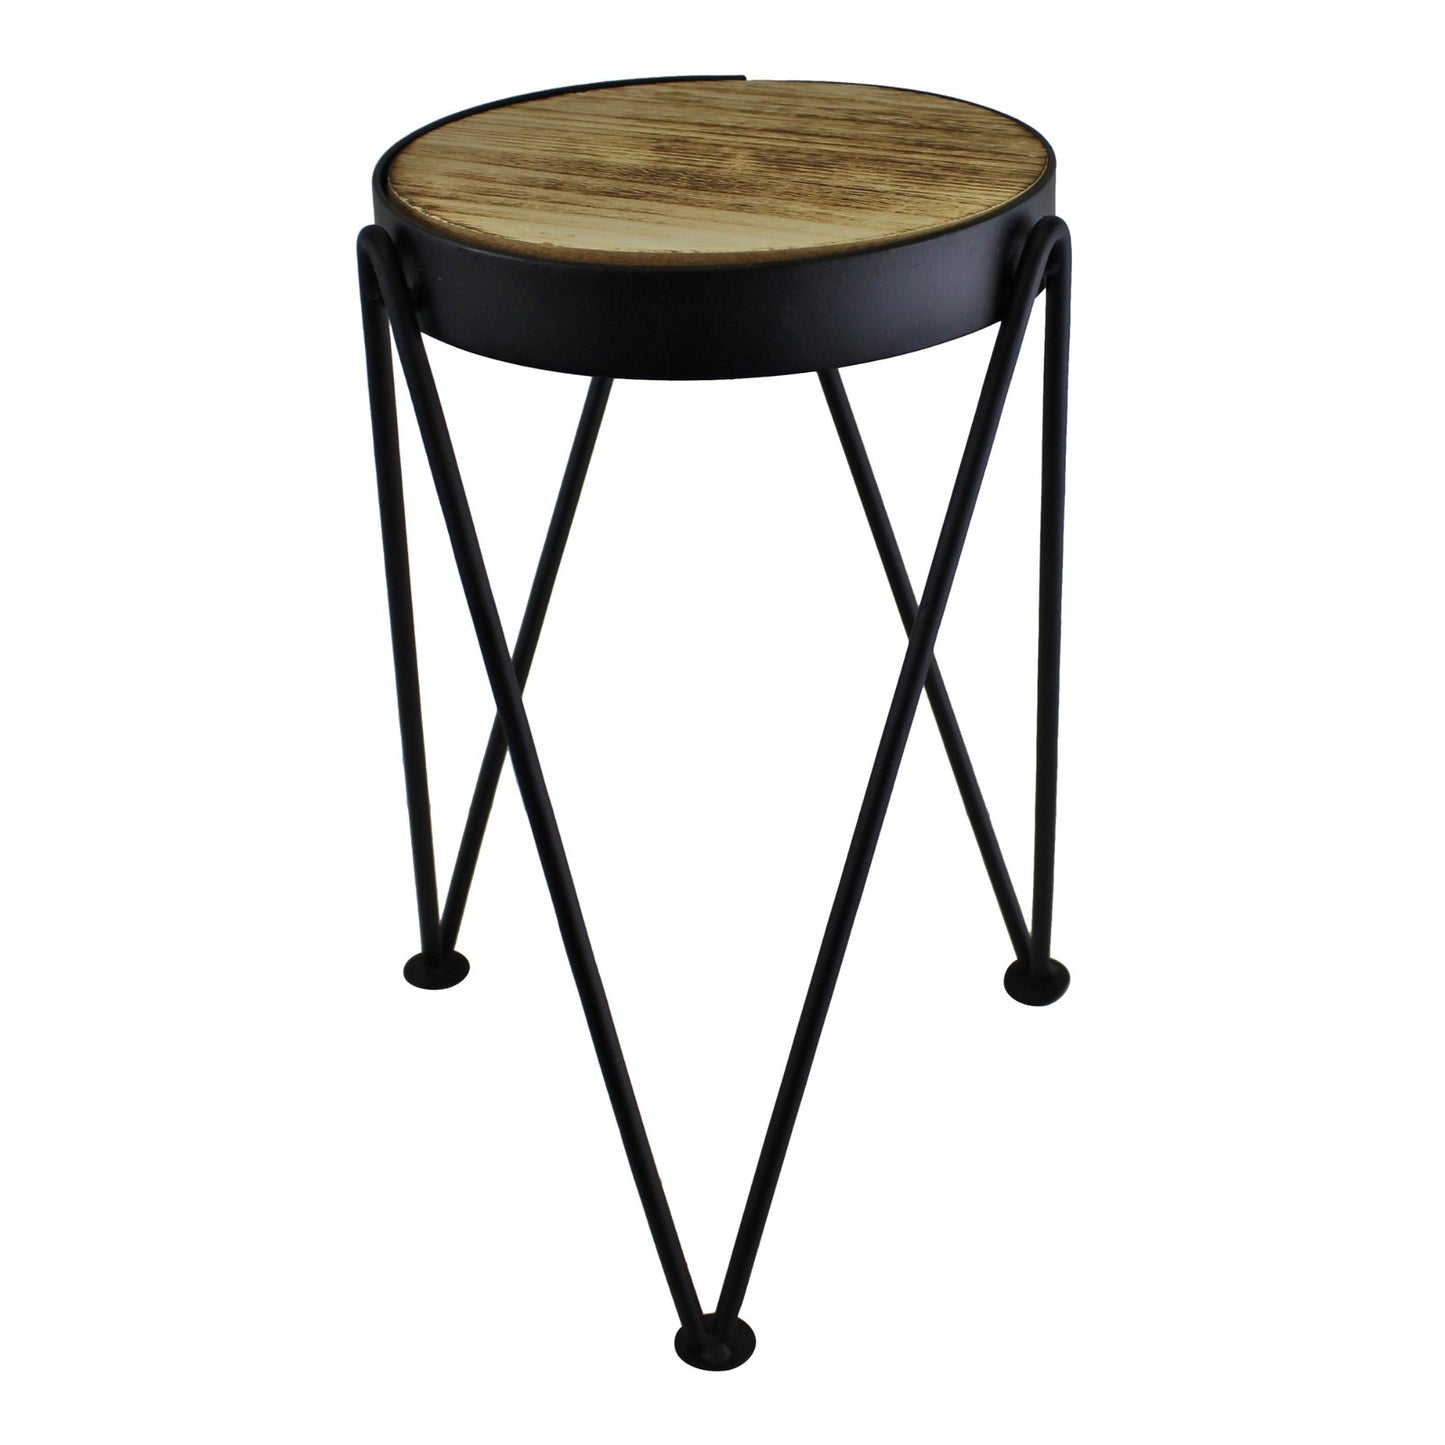 Set of 3 Black Metal and Wood Effect Plant Stands